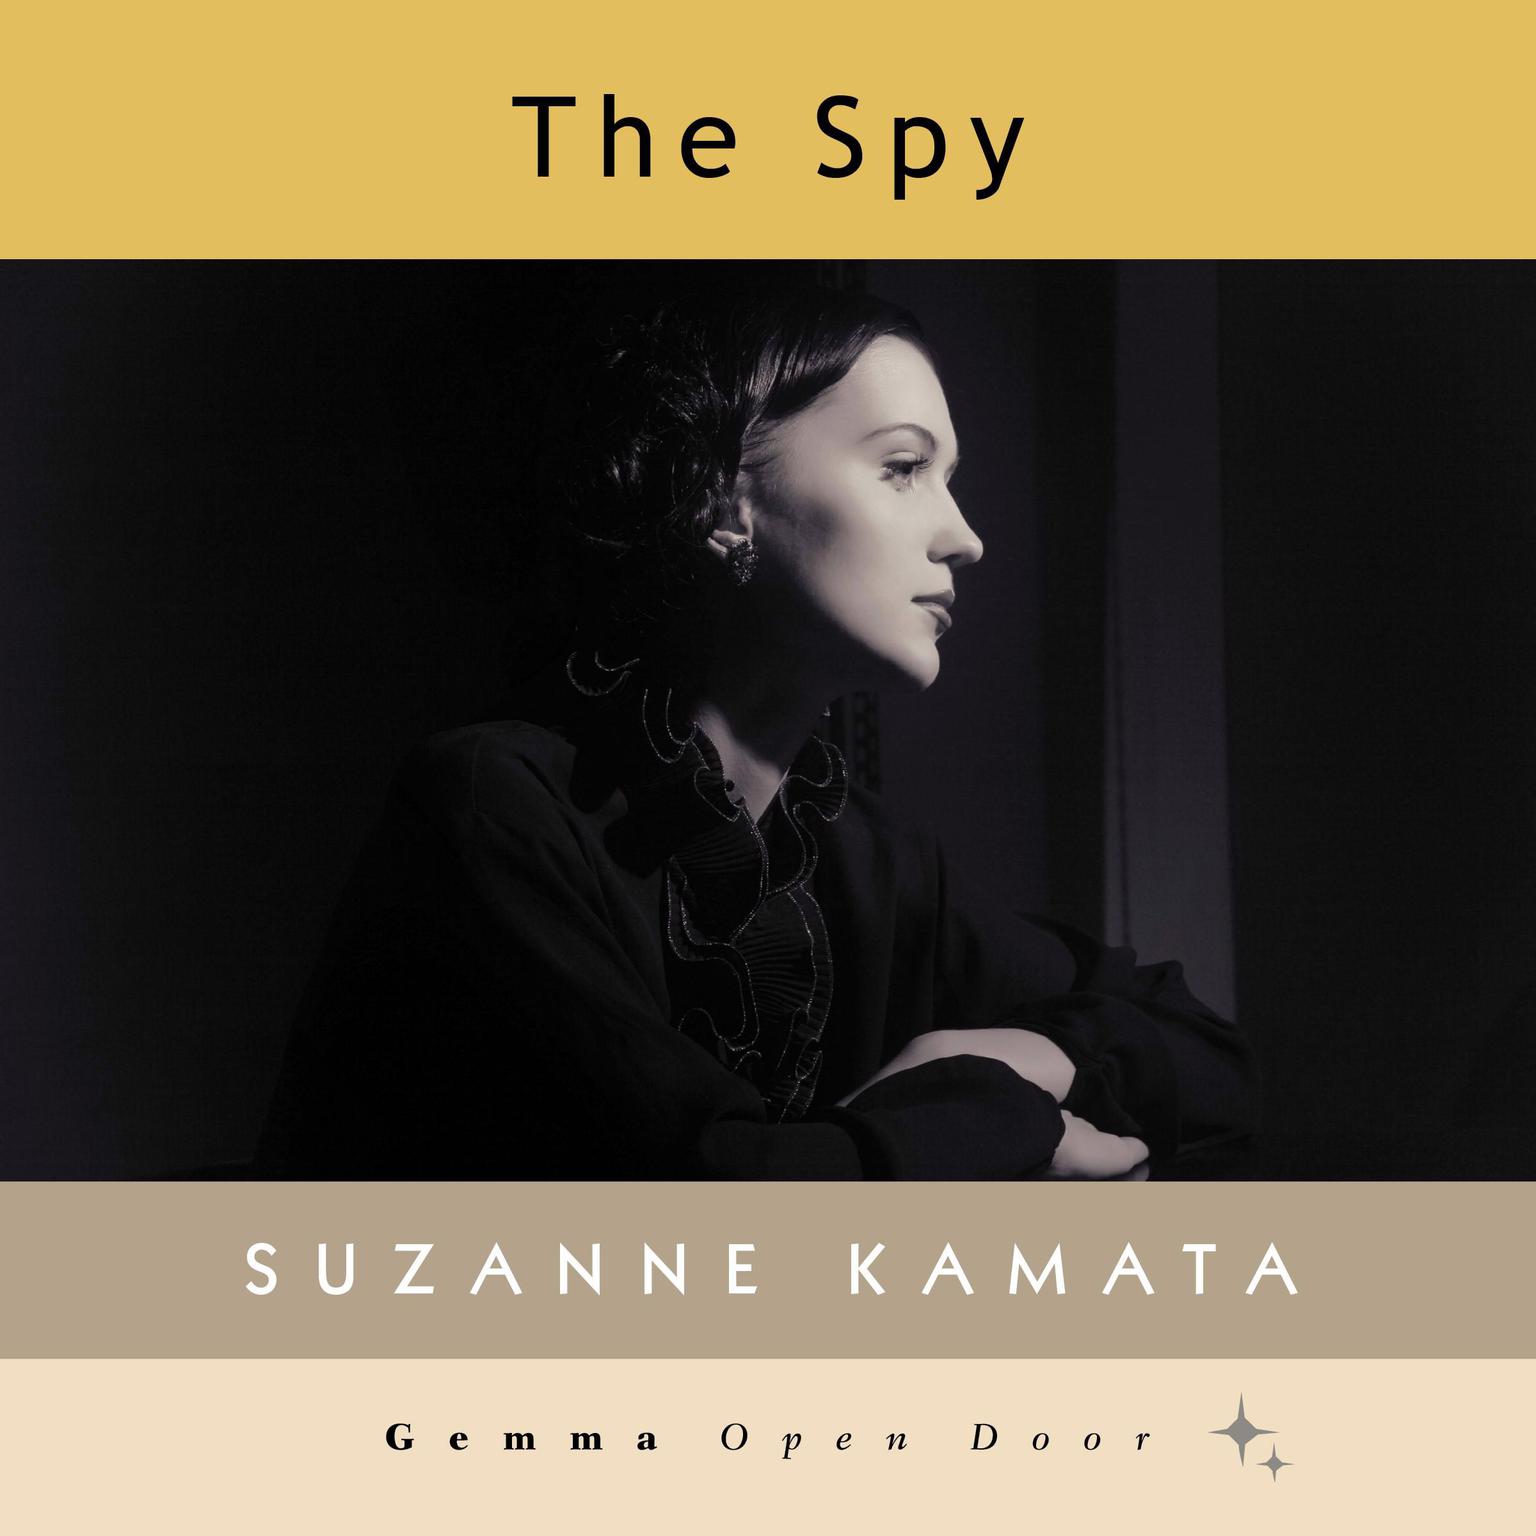 The Spy Audiobook, by Suzanne Kamata